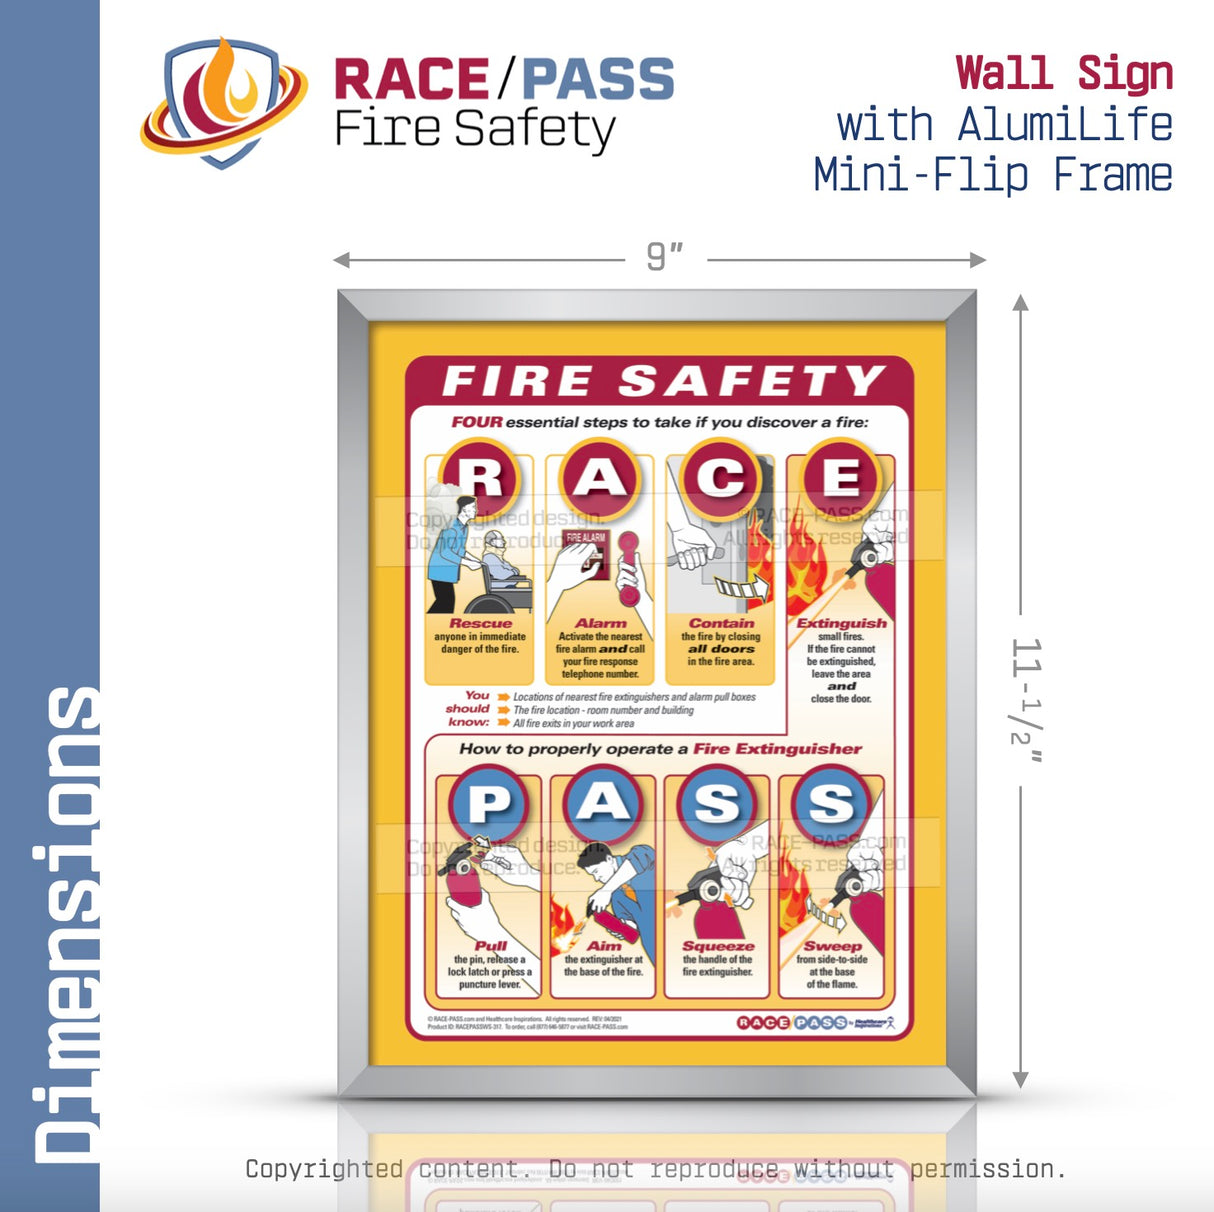 Give staff visual guidance on what to do during a fire. Post our RACE/PASS Fire Safety Sign with AlumiLife™ Mini-Flip near pull boxes and fire extinguishers as a frequent reminder of what to do when there is a fire.